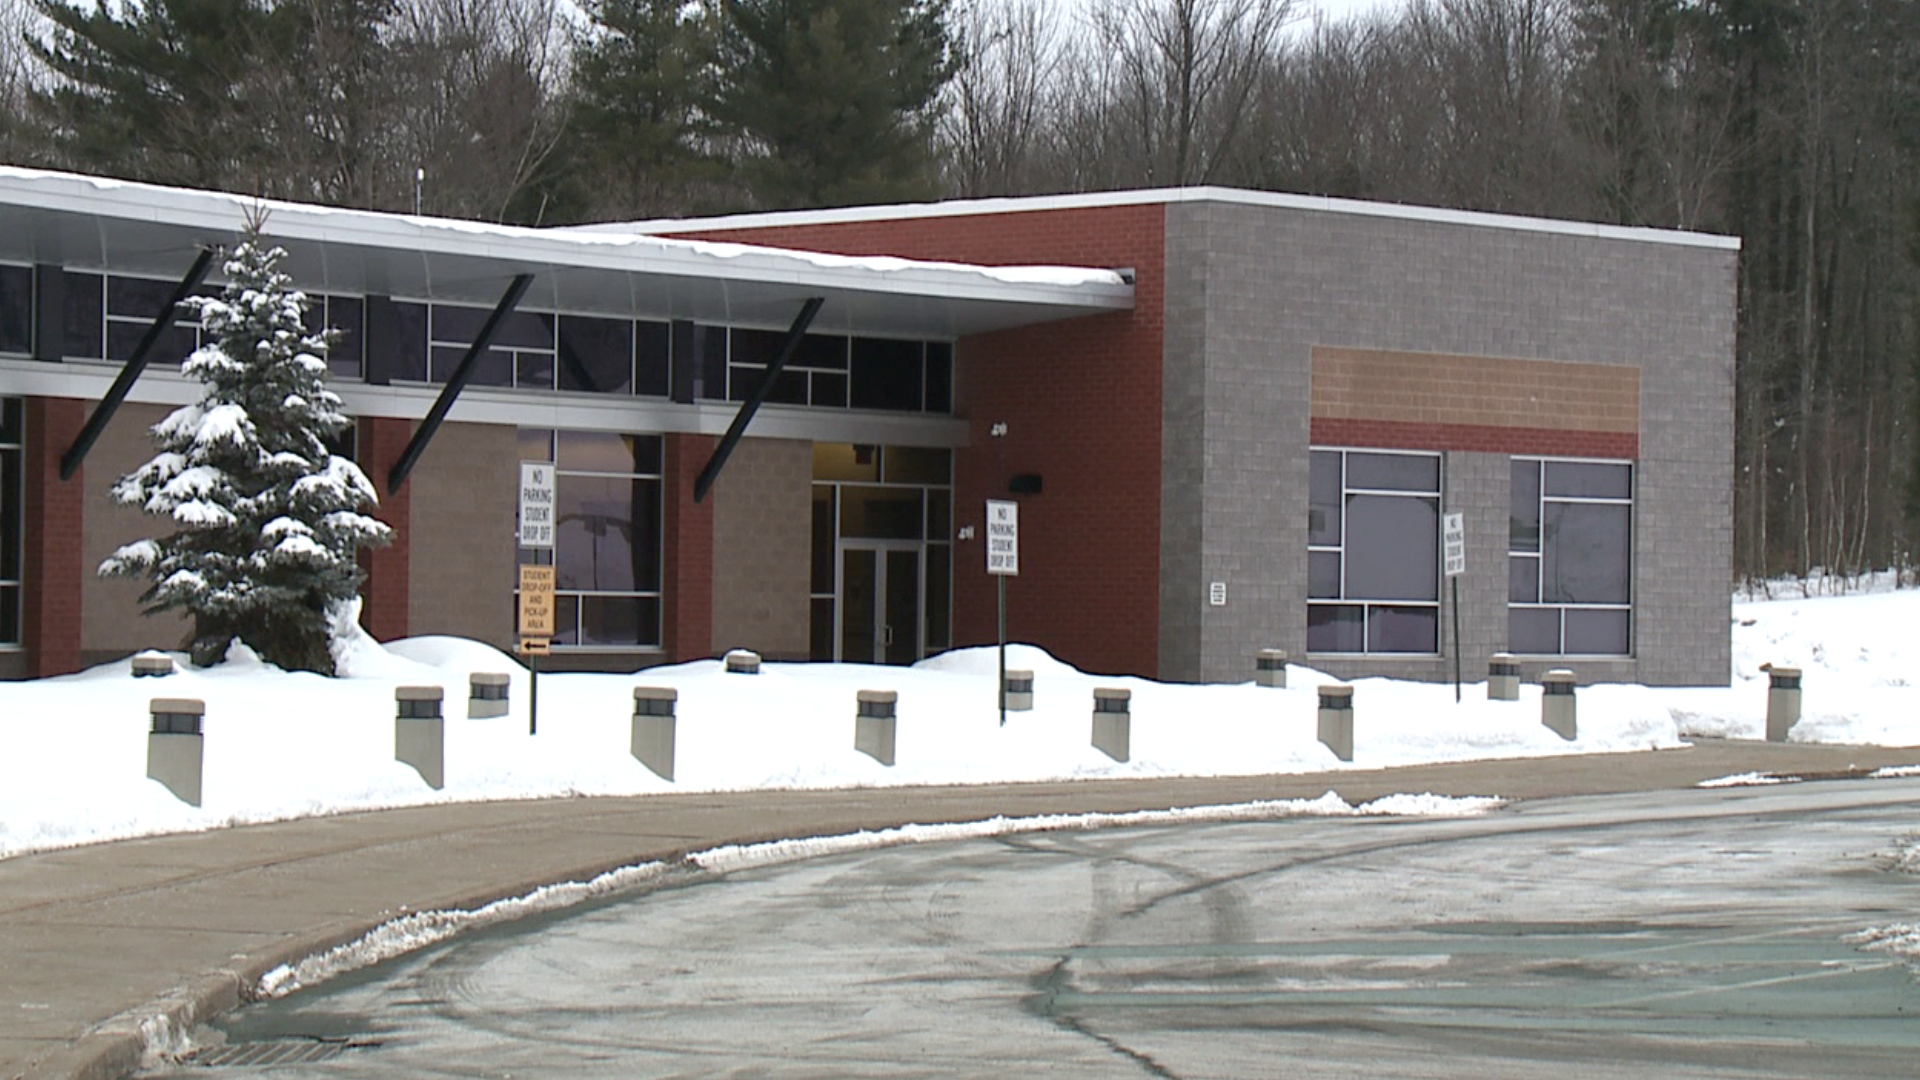 A school in Lackawanna County wants to hear from parents following the newest CDC recommendation - should students go back to full-time in-person learning?